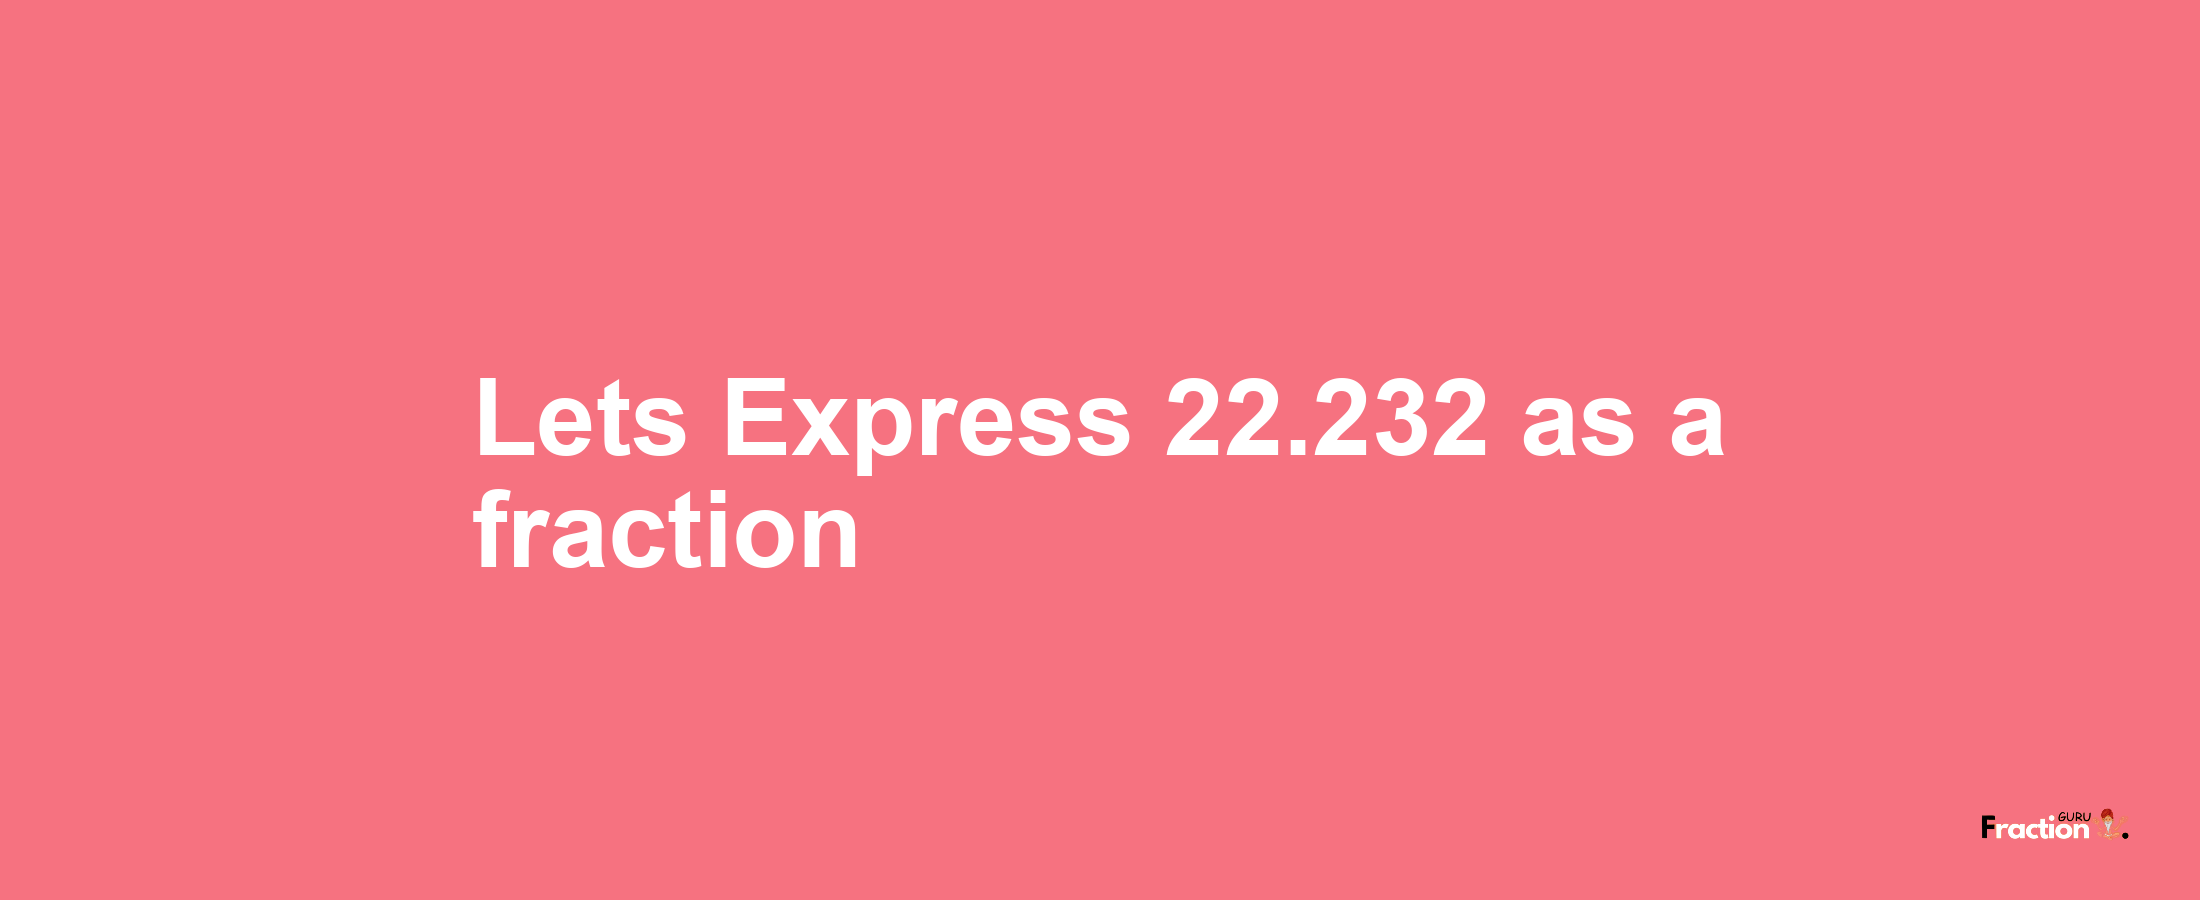 Lets Express 22.232 as afraction